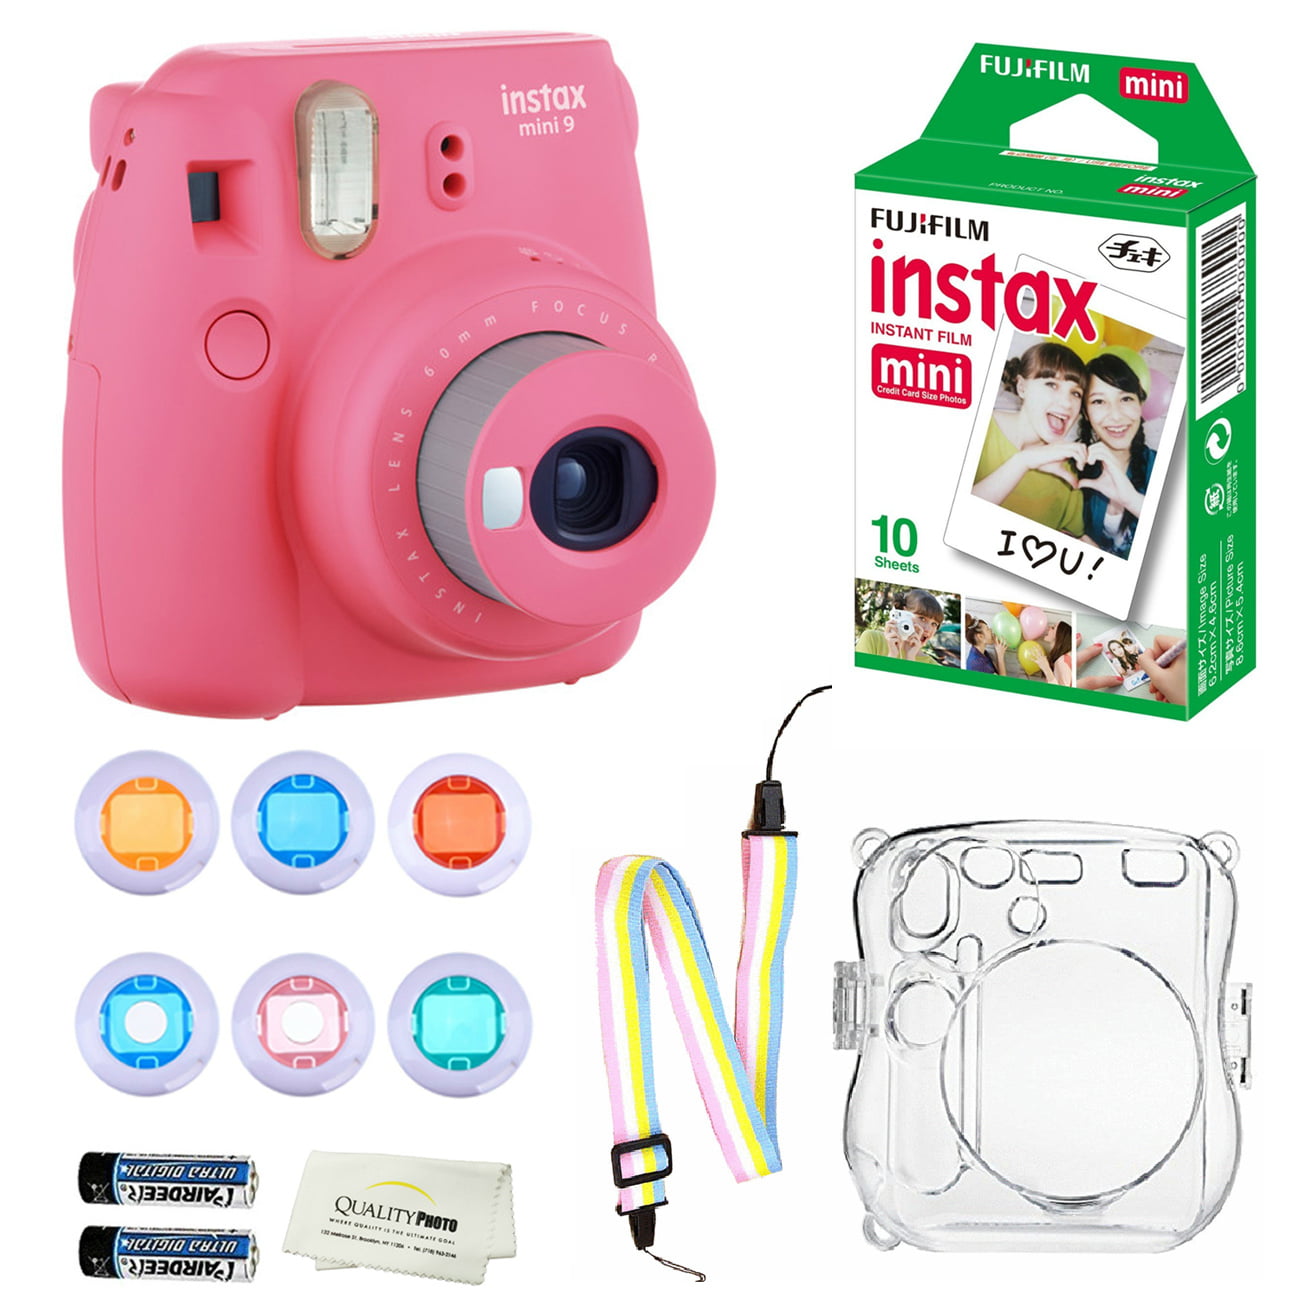 How does film get developed on Fujifilm Instax Mini 9?